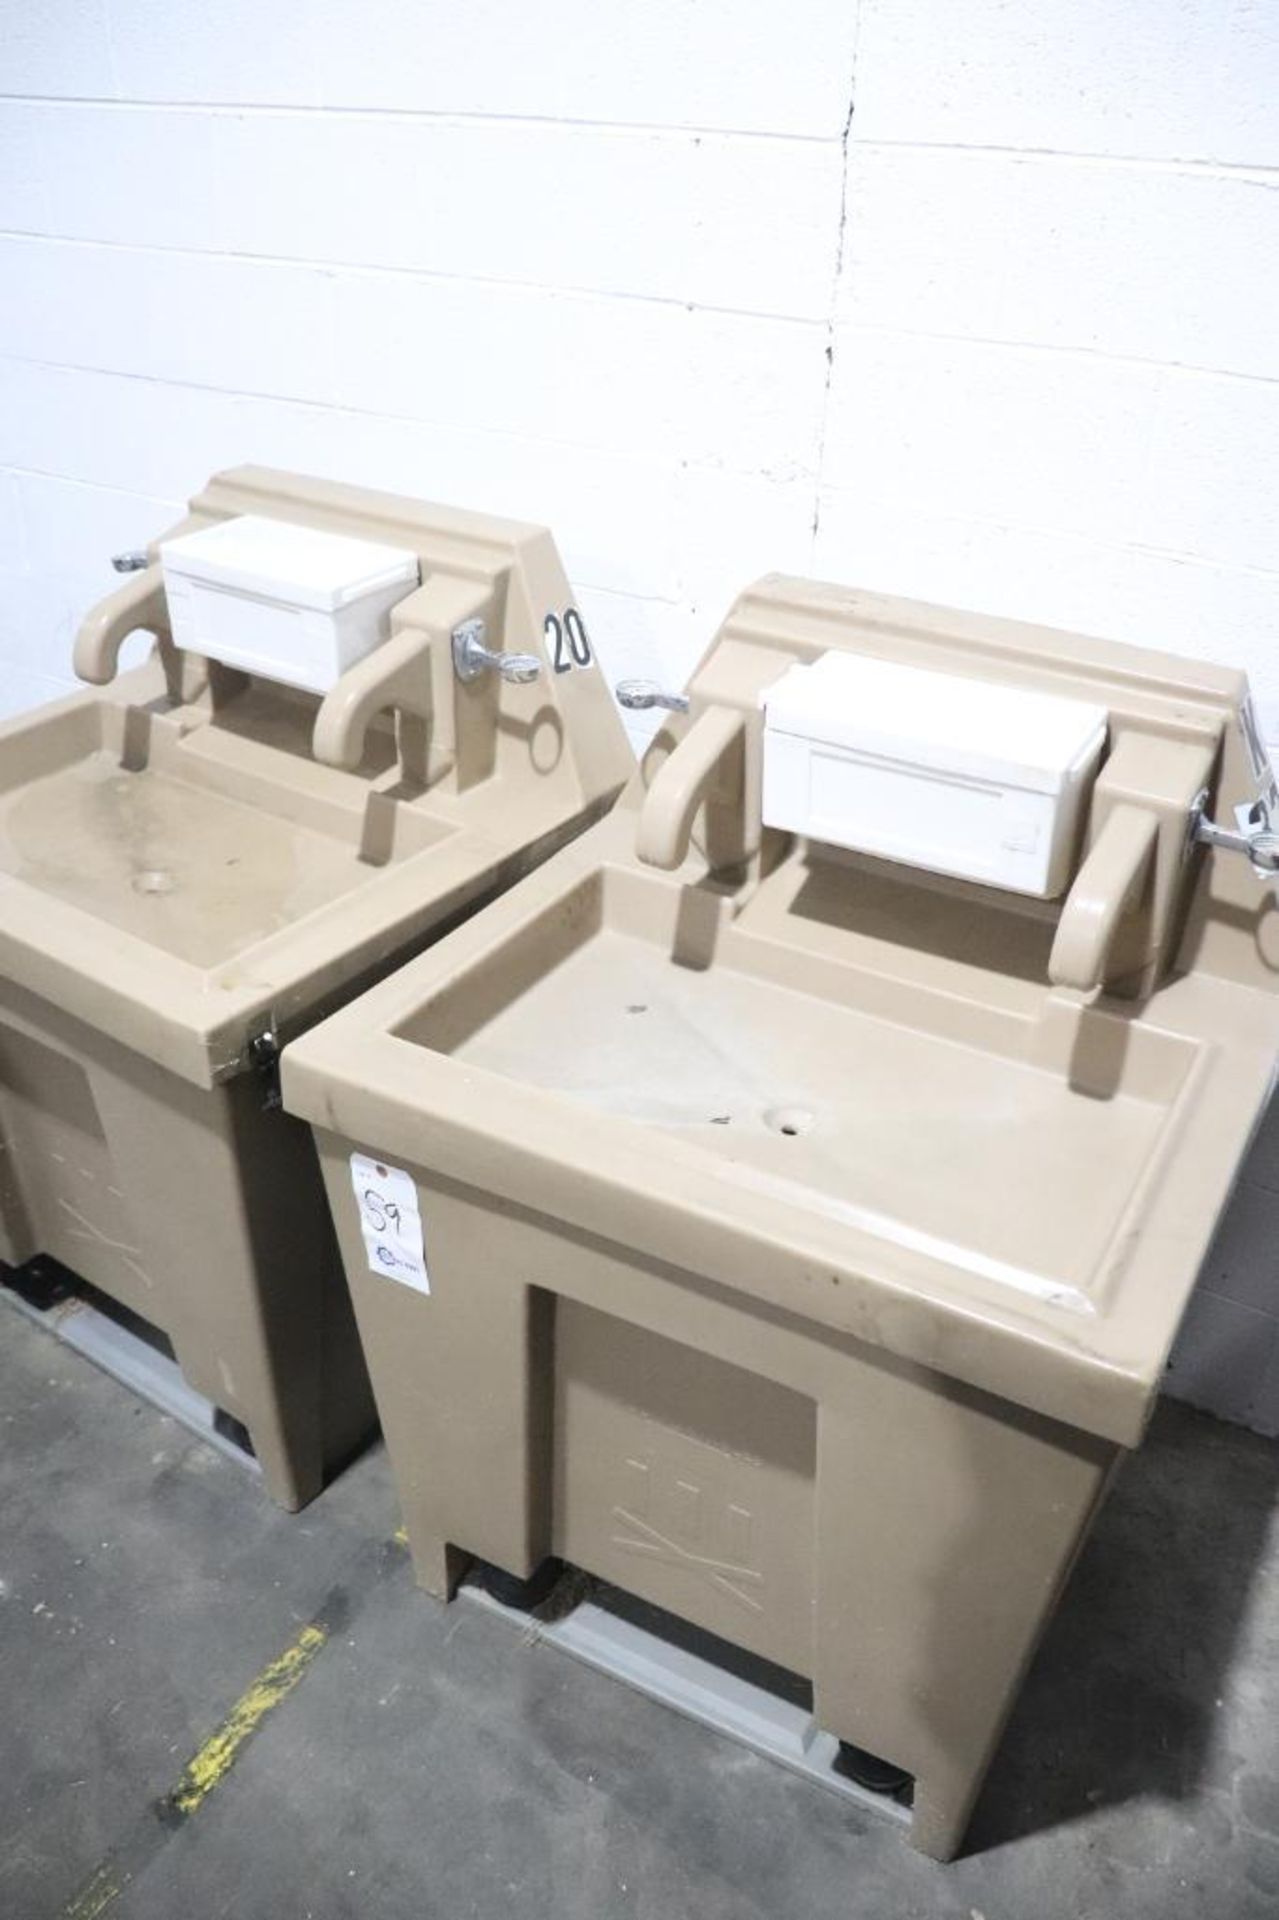 Portable sinks - Image 3 of 7